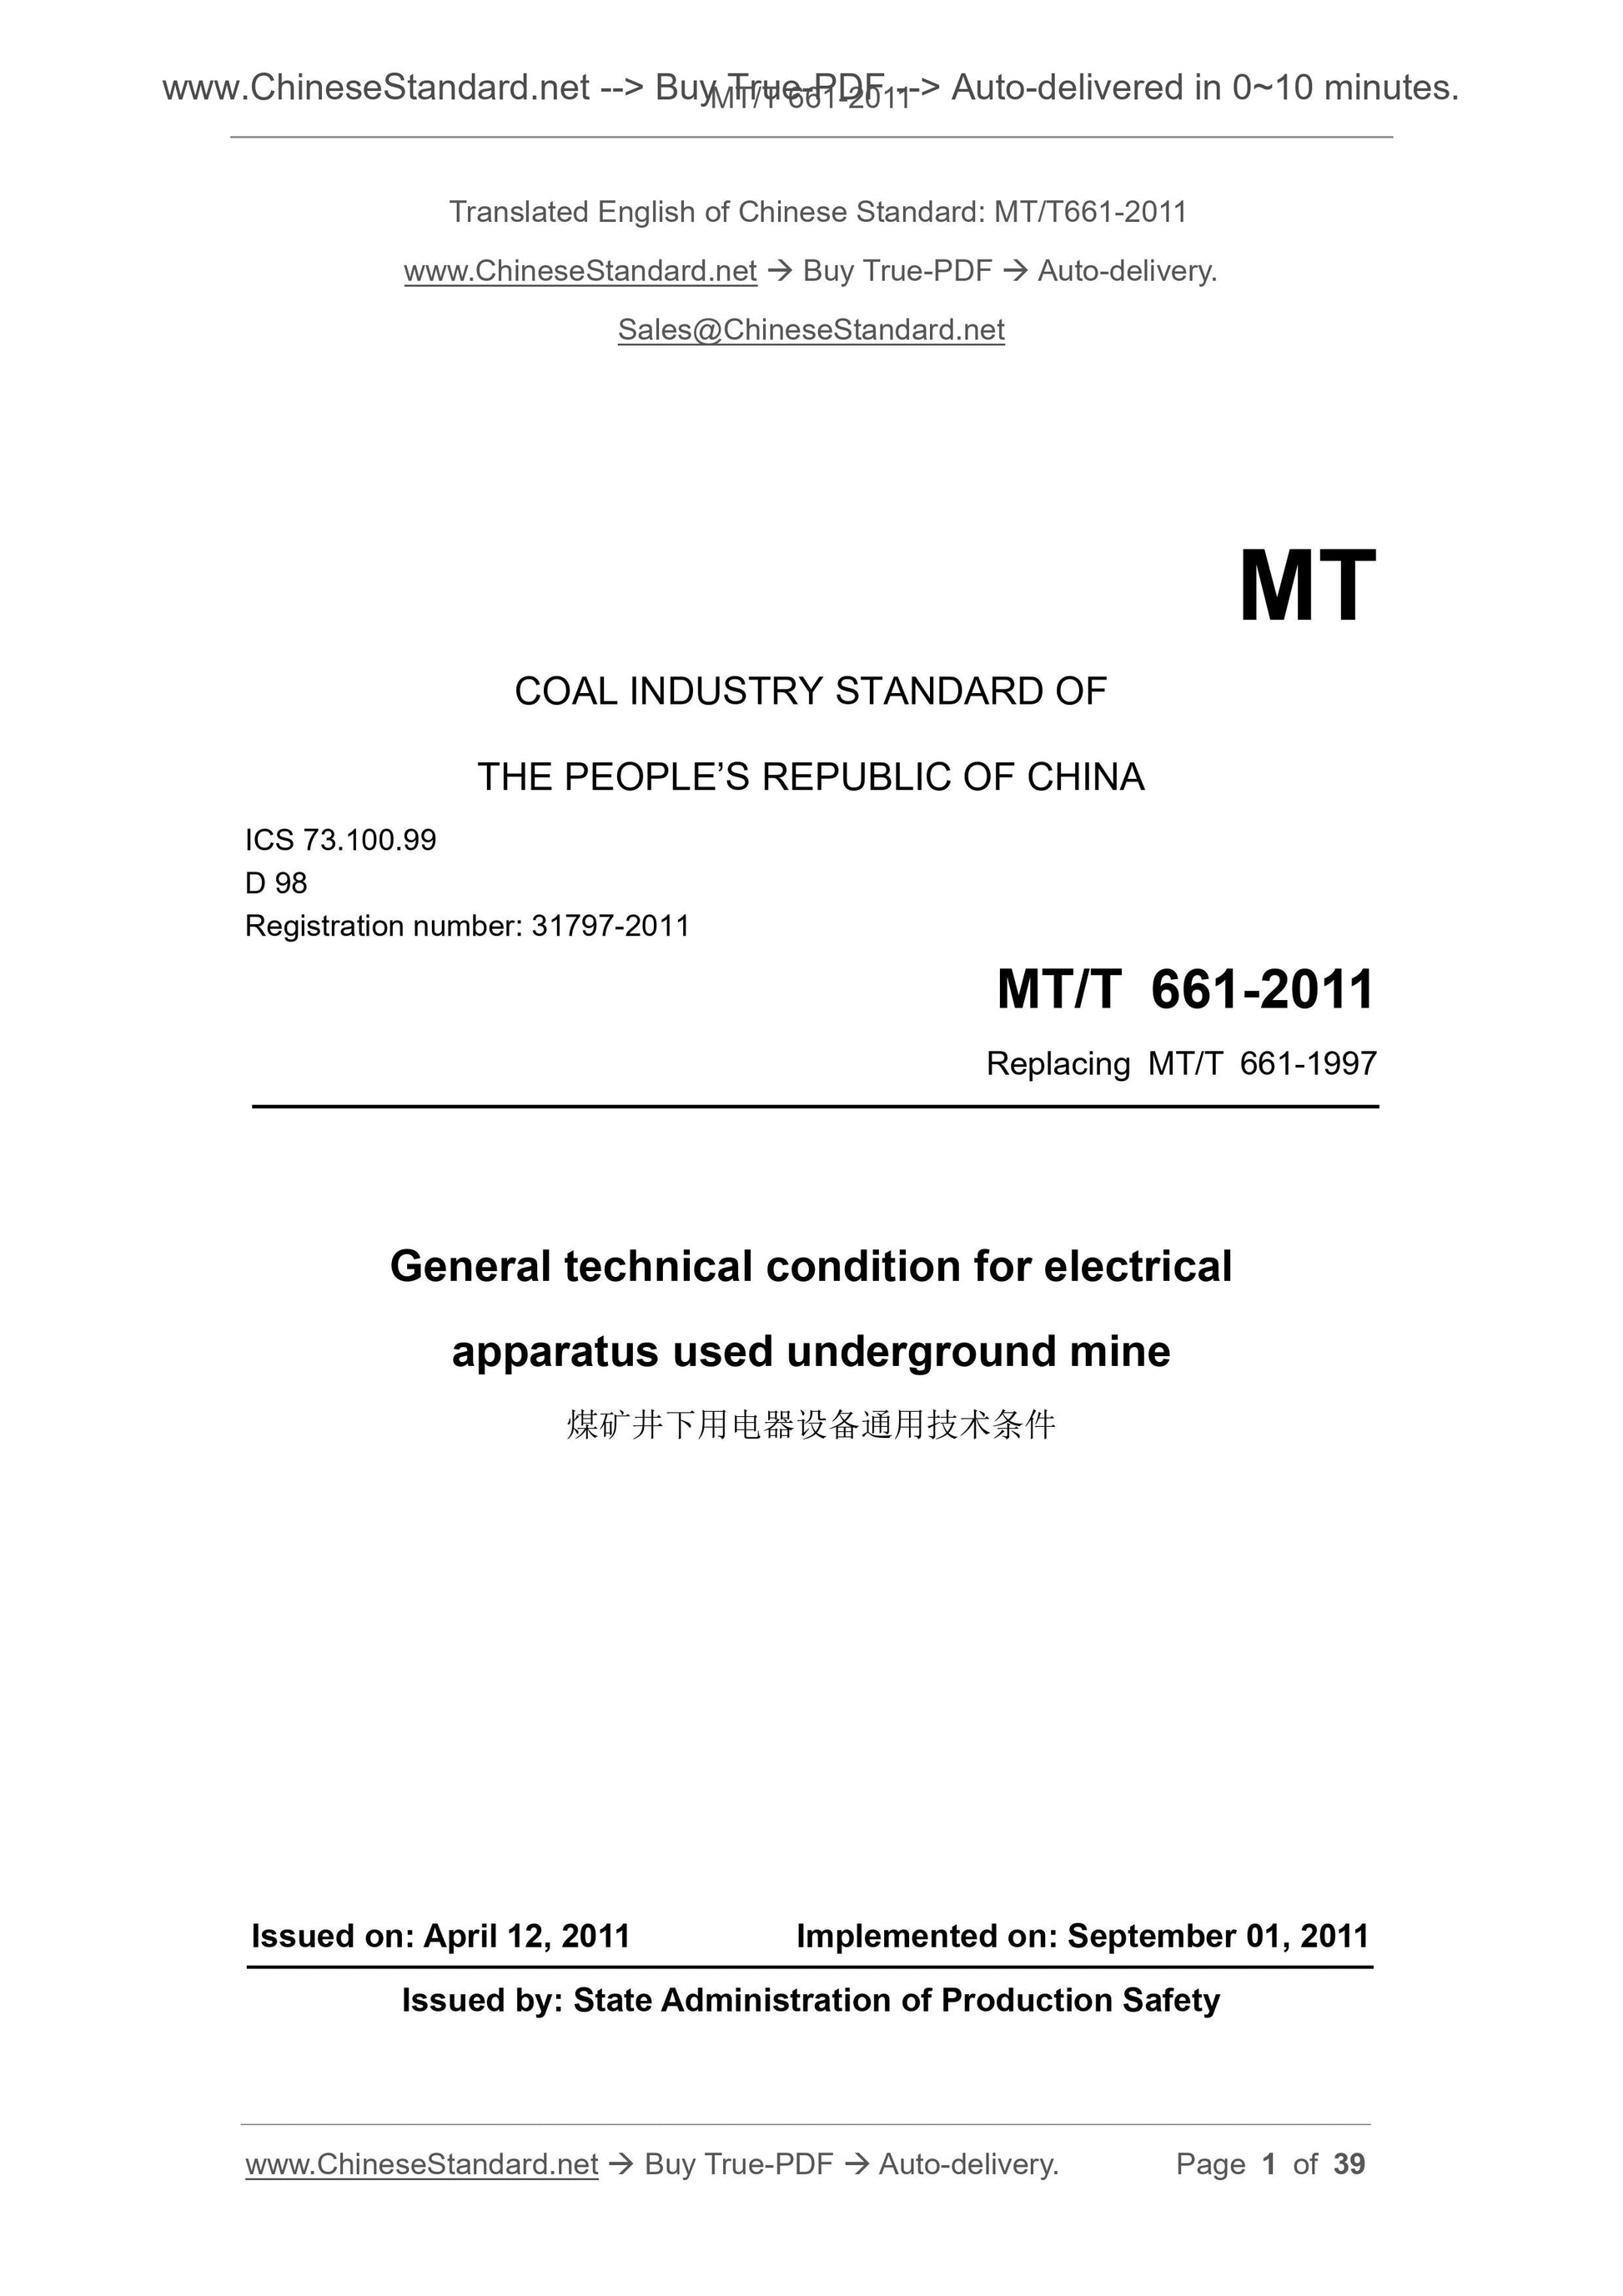 MT/T 661-2011 Page 1